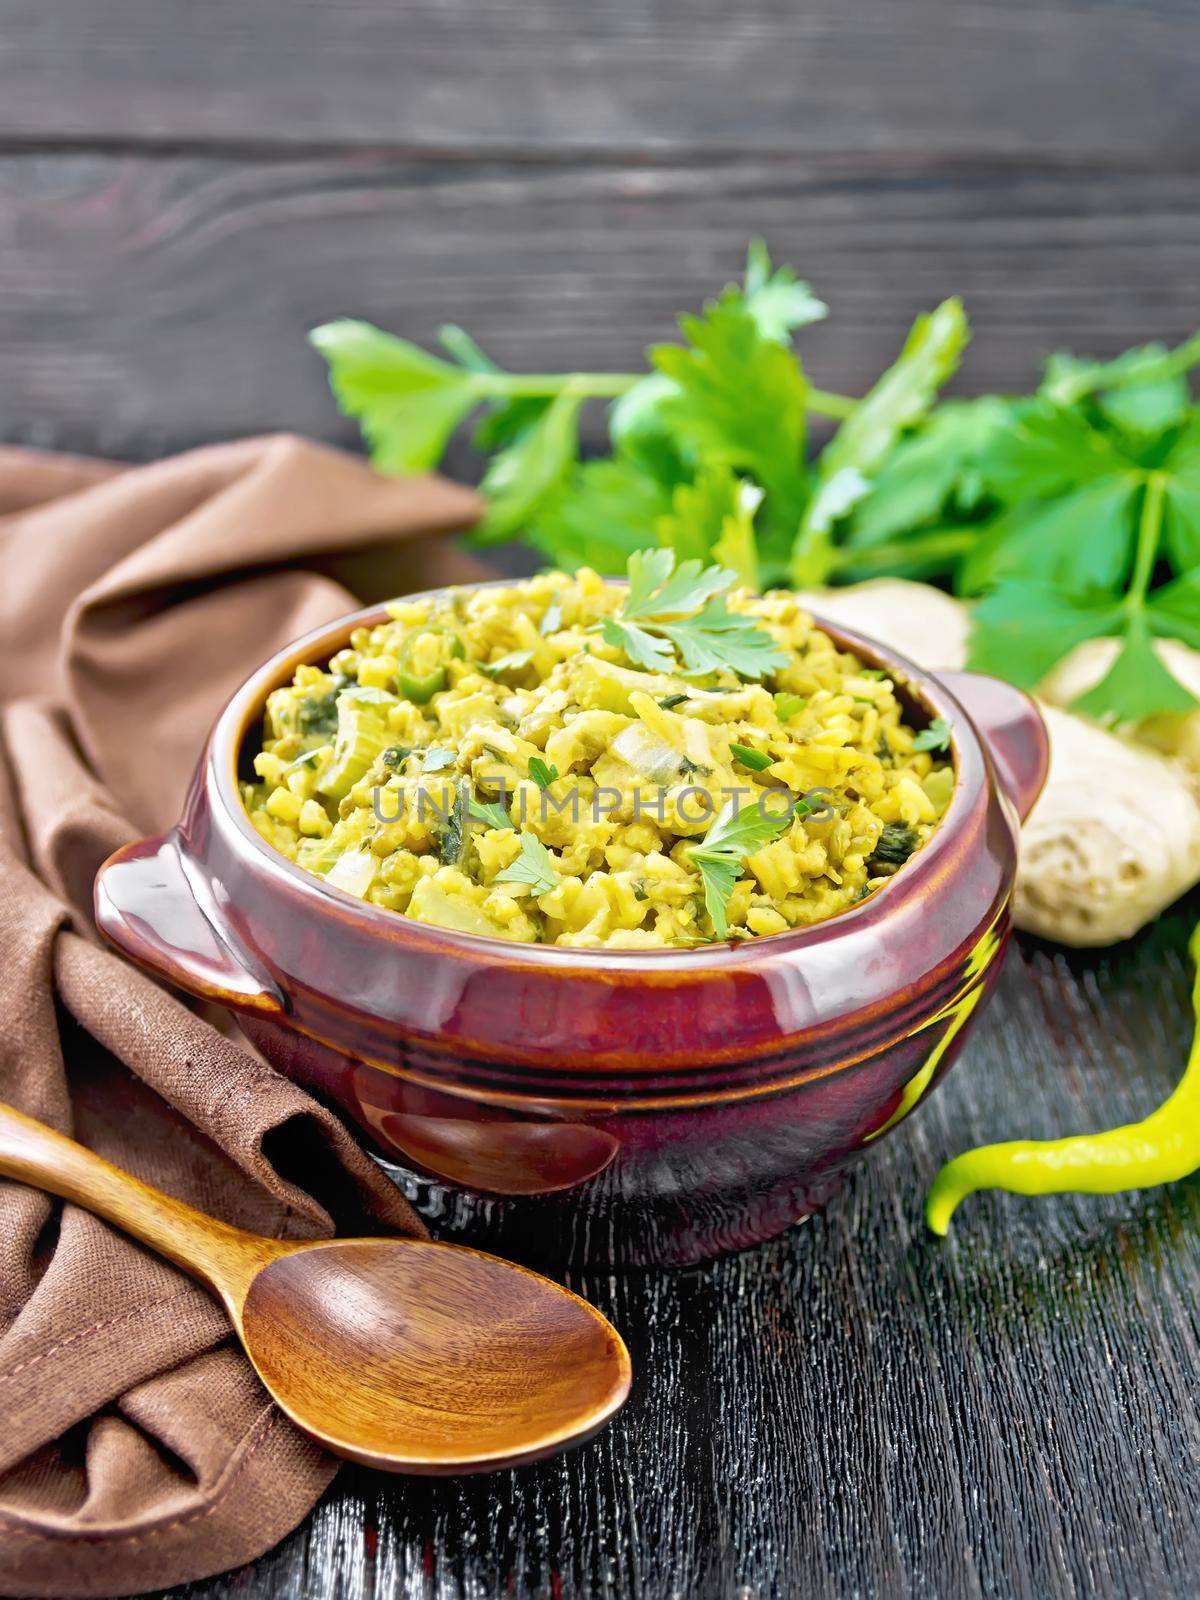 Indian national dish kichari made of mung bean, rice, celery, spinach, hot pepper and spices in a bowl on a towel, ginger and spoon on black wooden board background